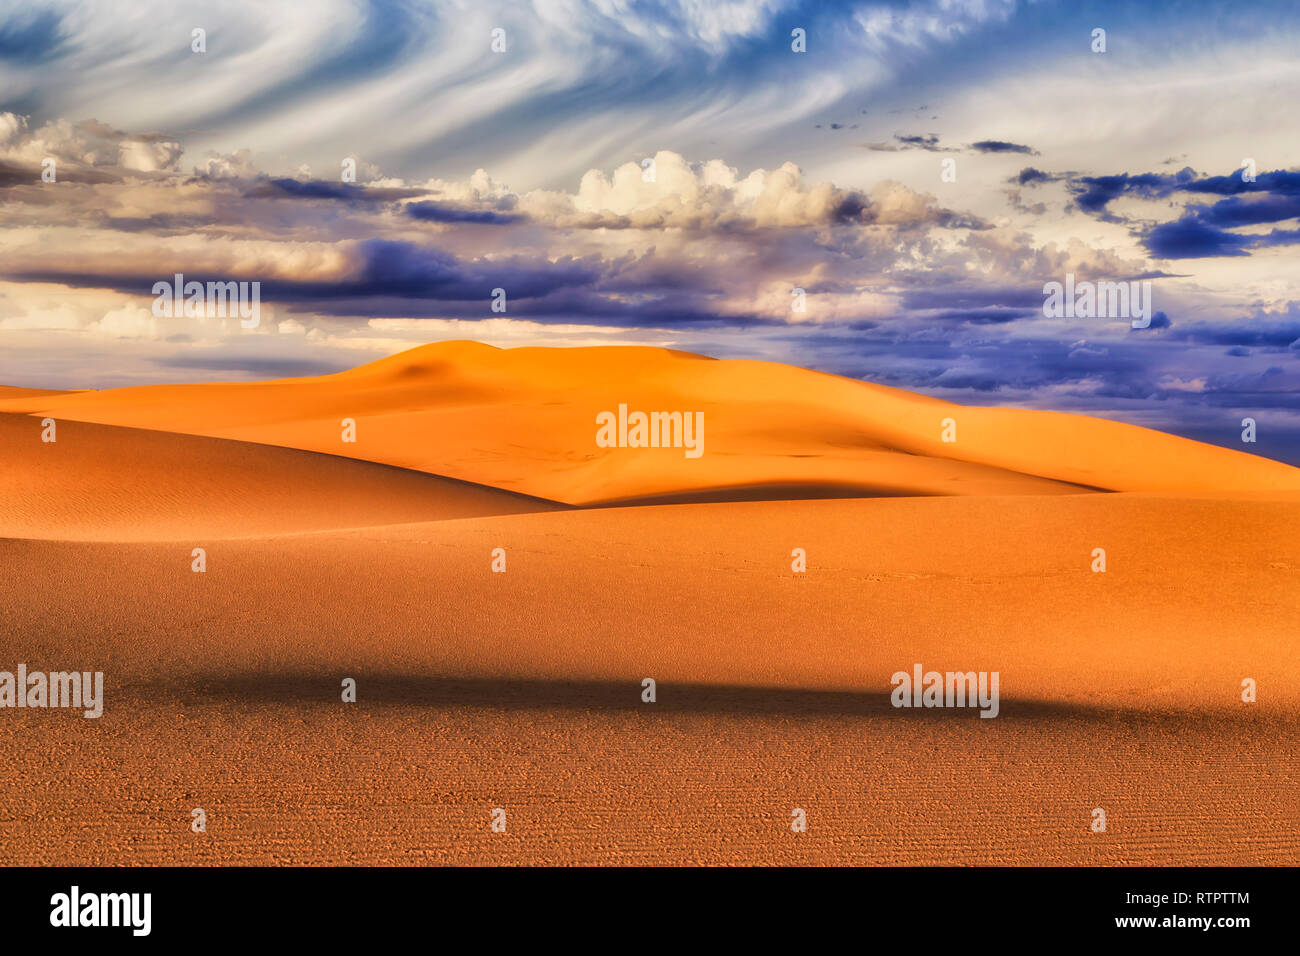 Endless lifeless sand dunes under clouds and blue sky in soft sunset light with shades drawing images with shapes of sand masses. Stock Photo